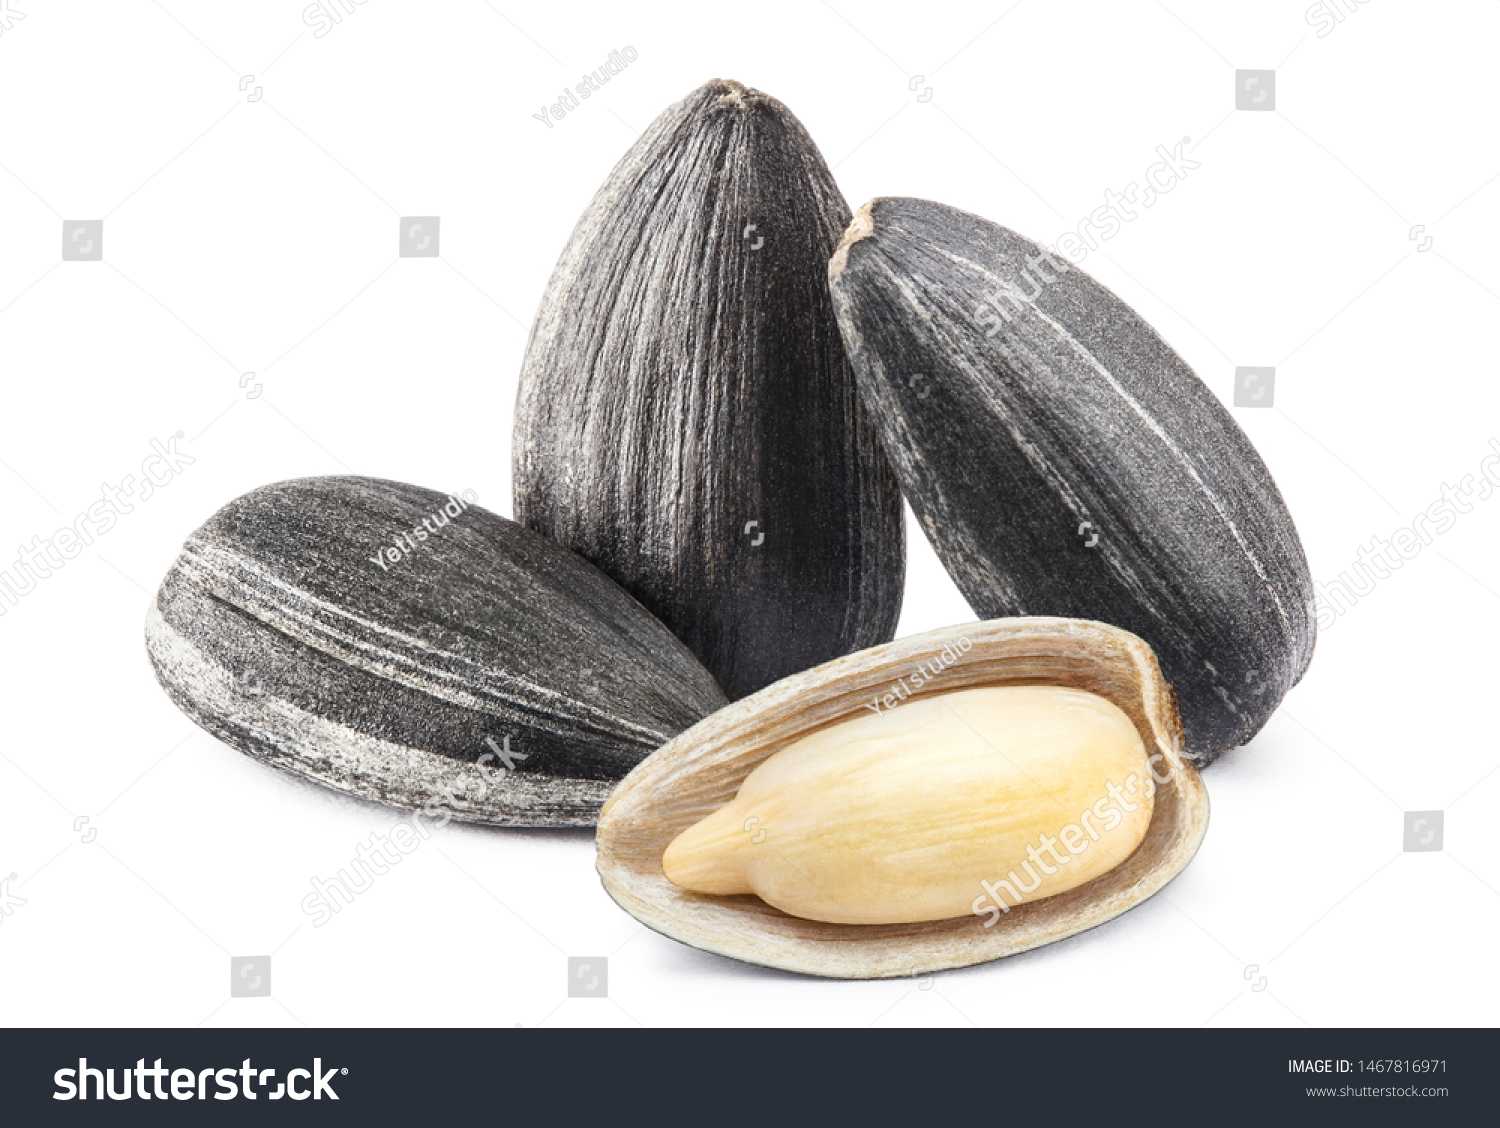 Close-up of delicious sunflower black seeds, isolated on white background #1467816971